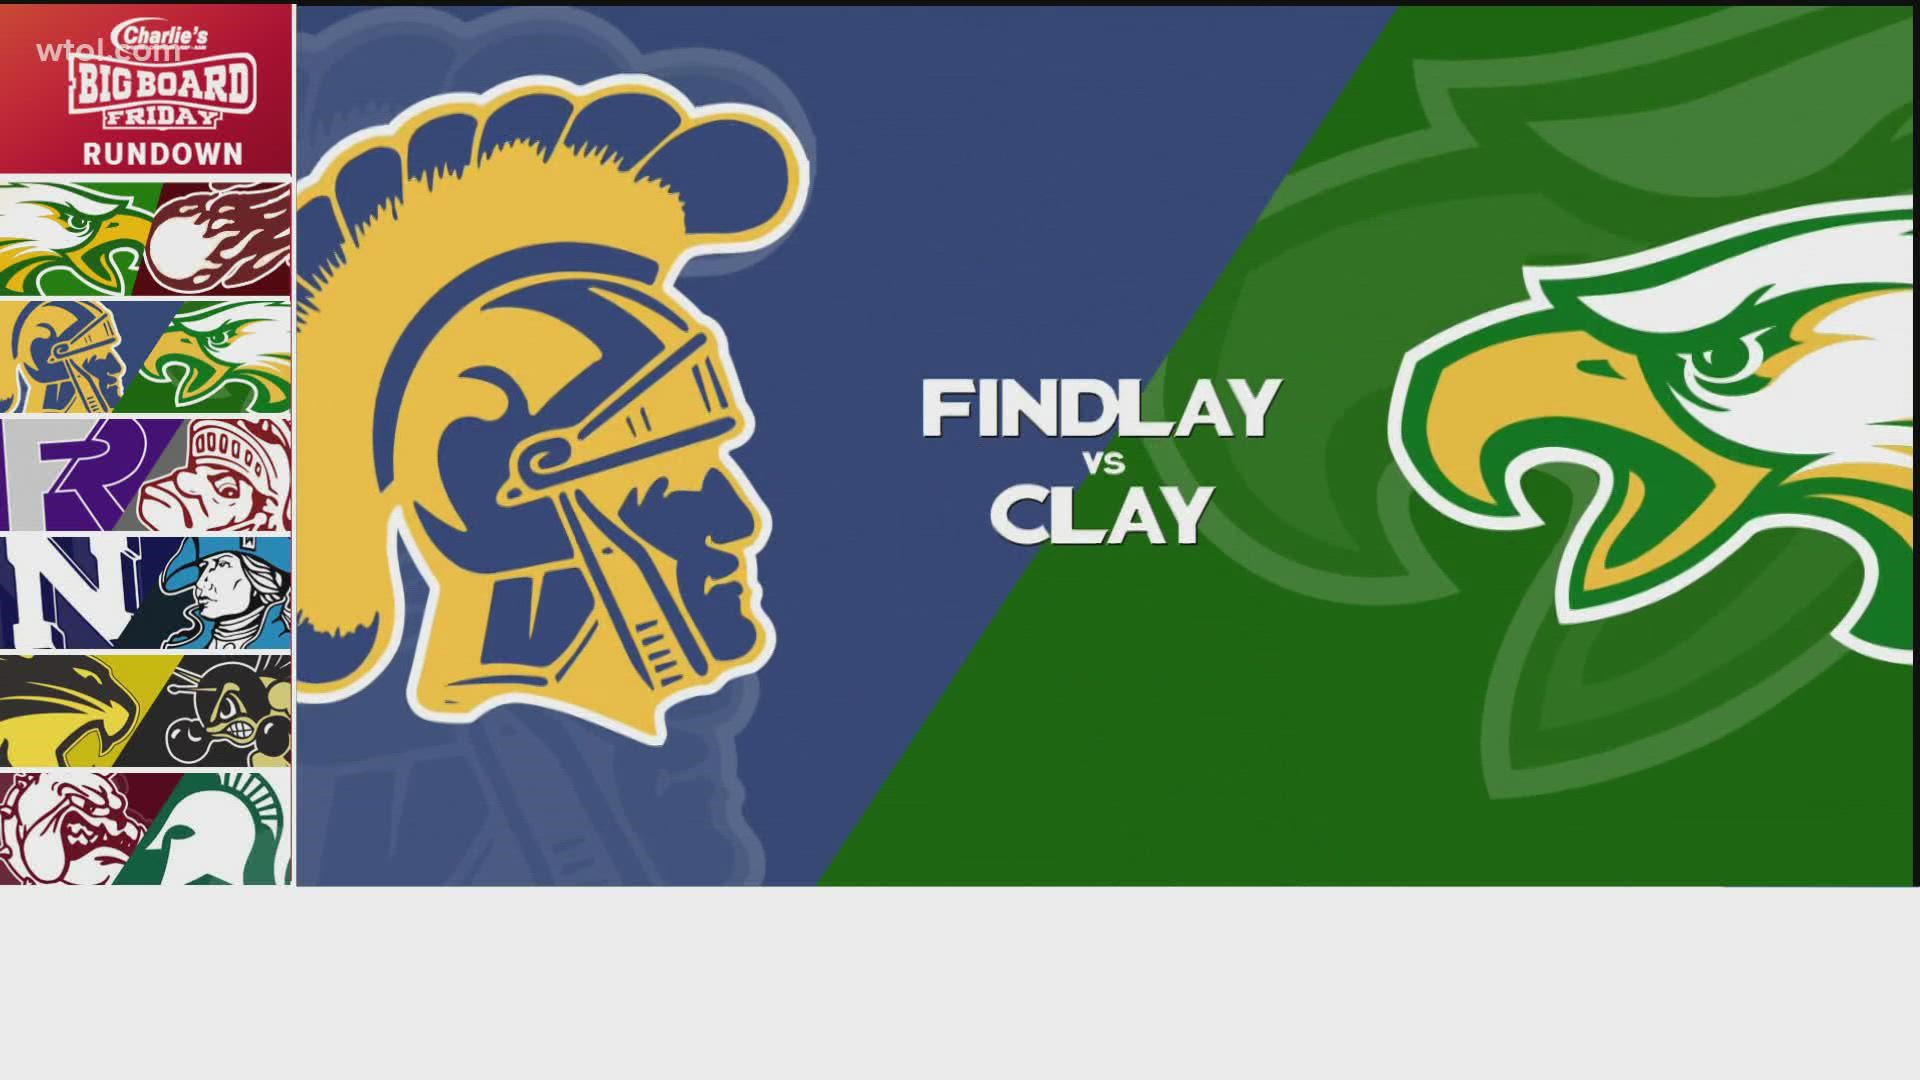 Findlay has won two straight. Trojans out in Oregon tonight taking on the Clay Eagles.